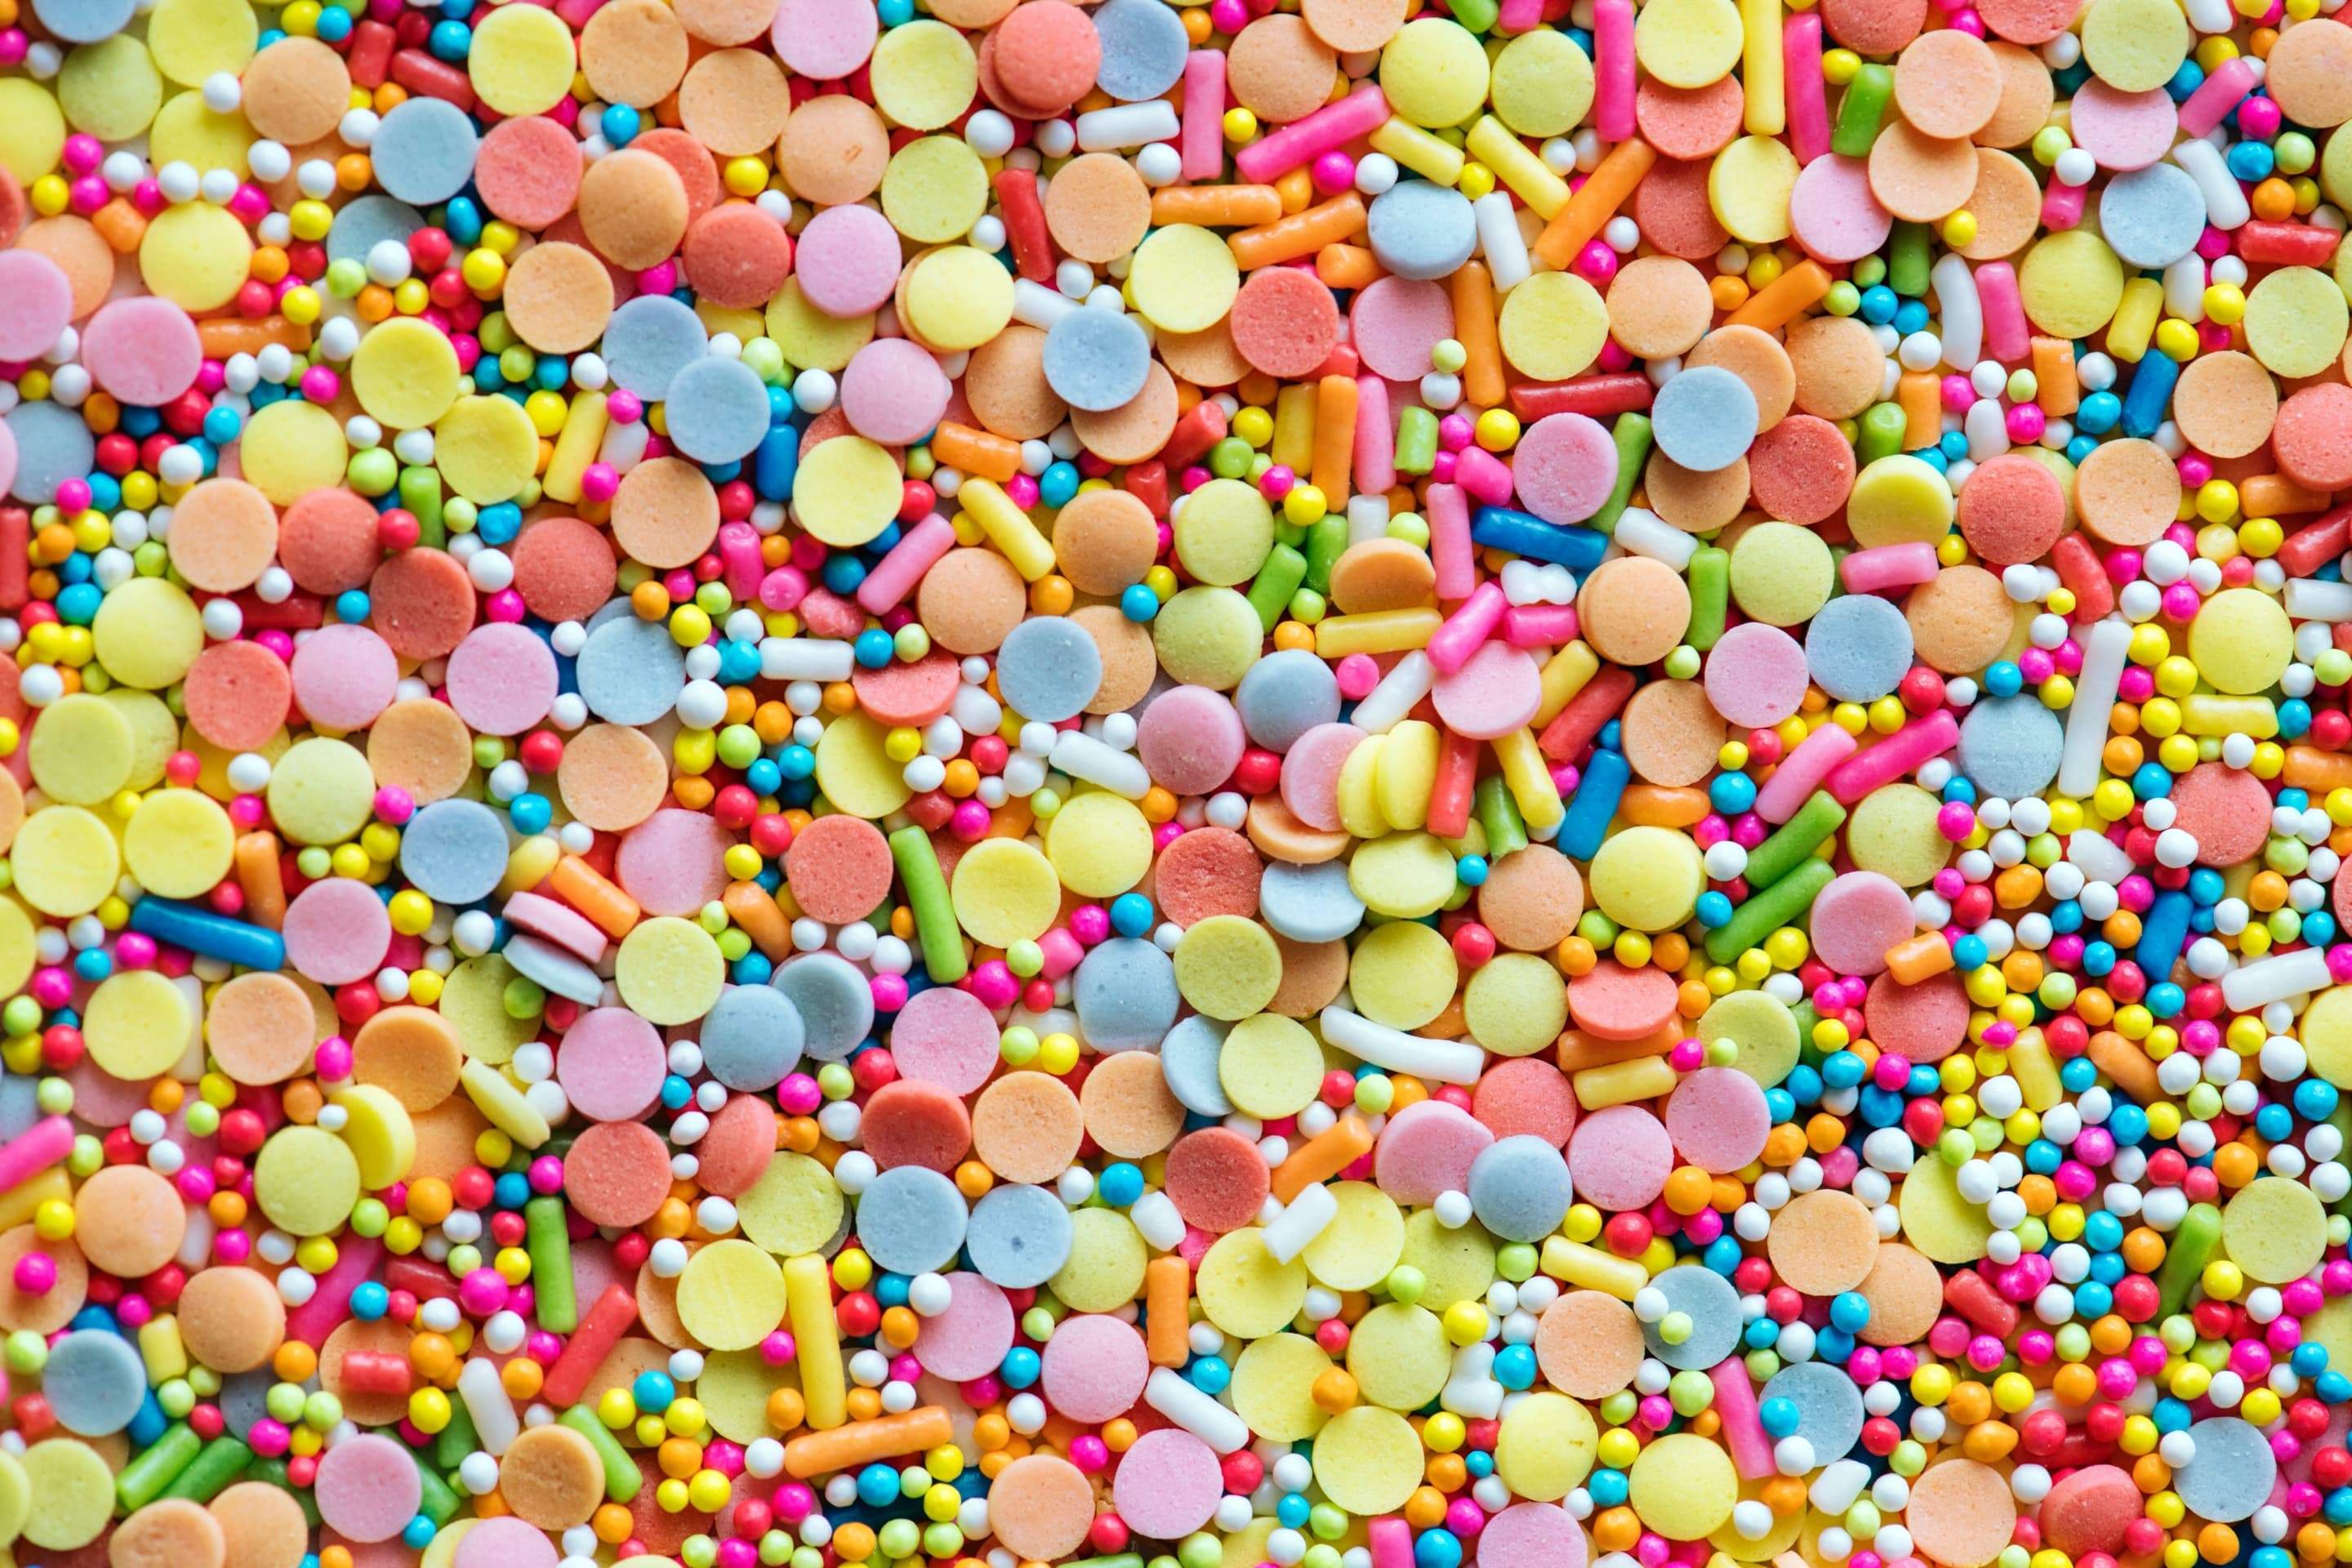 Can Sugar Really Make Your Kids Hyper?